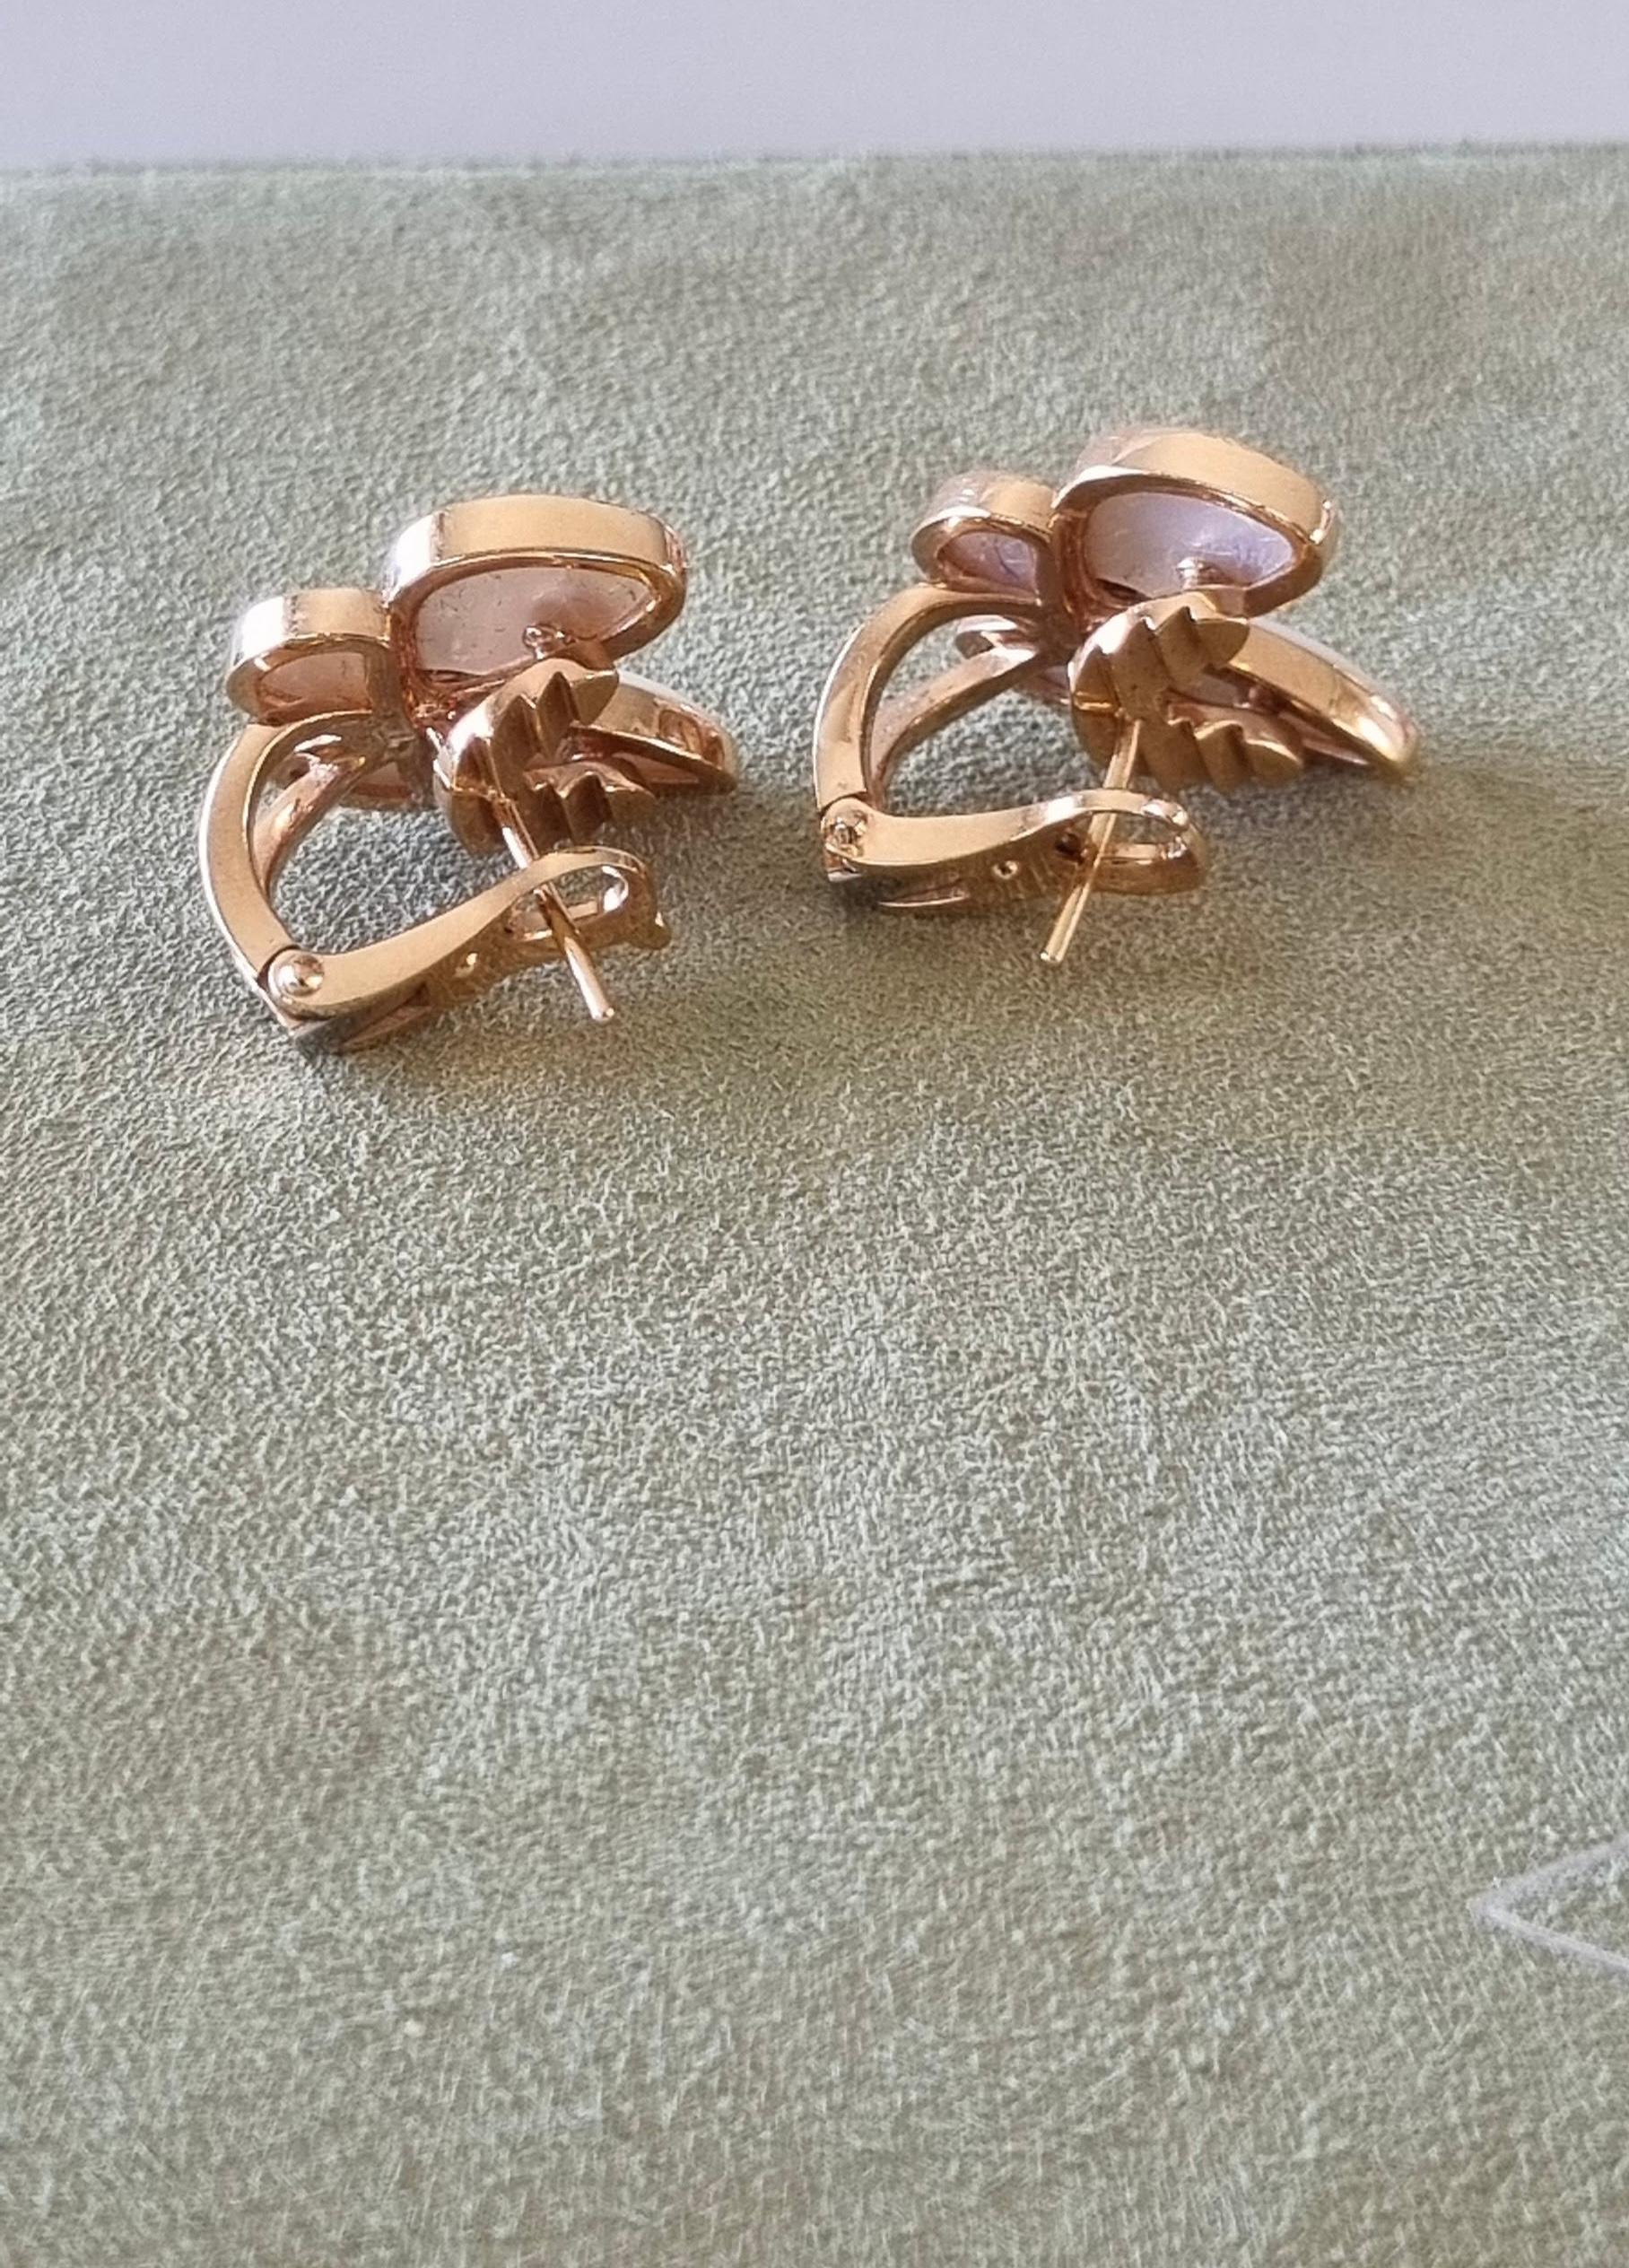 Brilliant Cut Van Cleef & Arpels two Butterfly rose Gold mop and marquise Diamonds Earrings For Sale